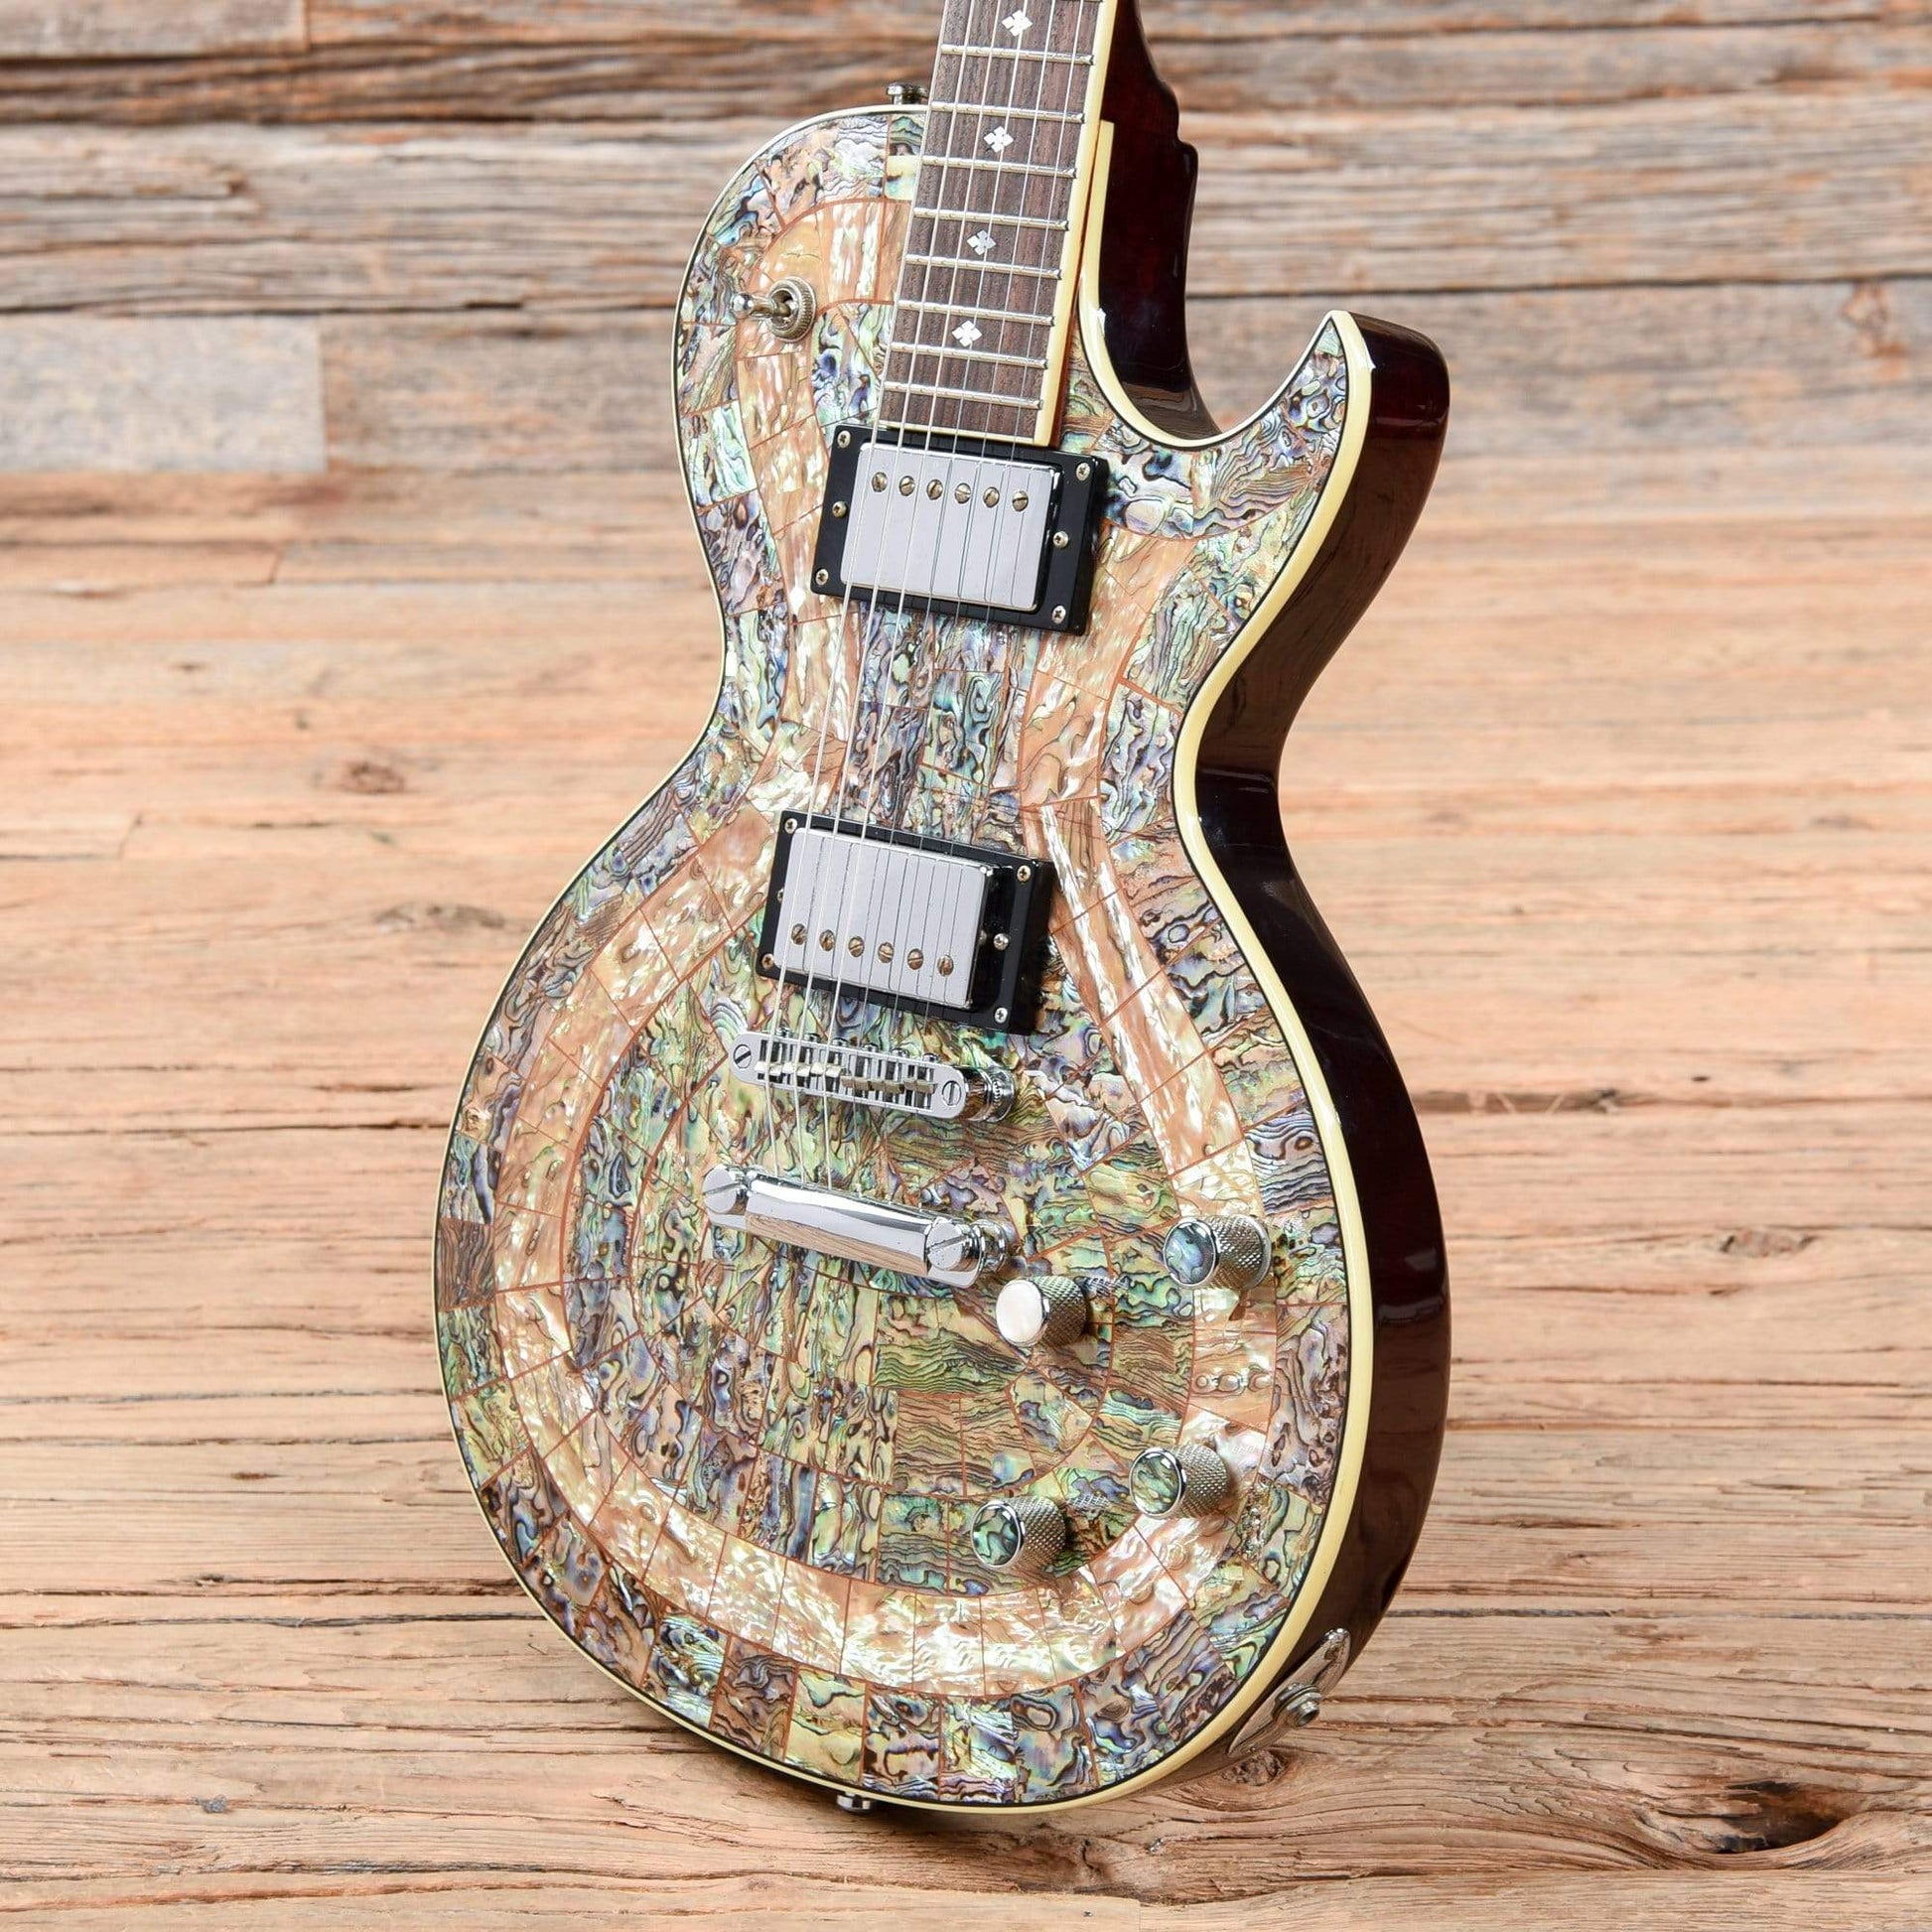 Xaviere XV-110 Abalone 2006 Electric Guitars / Solid Body